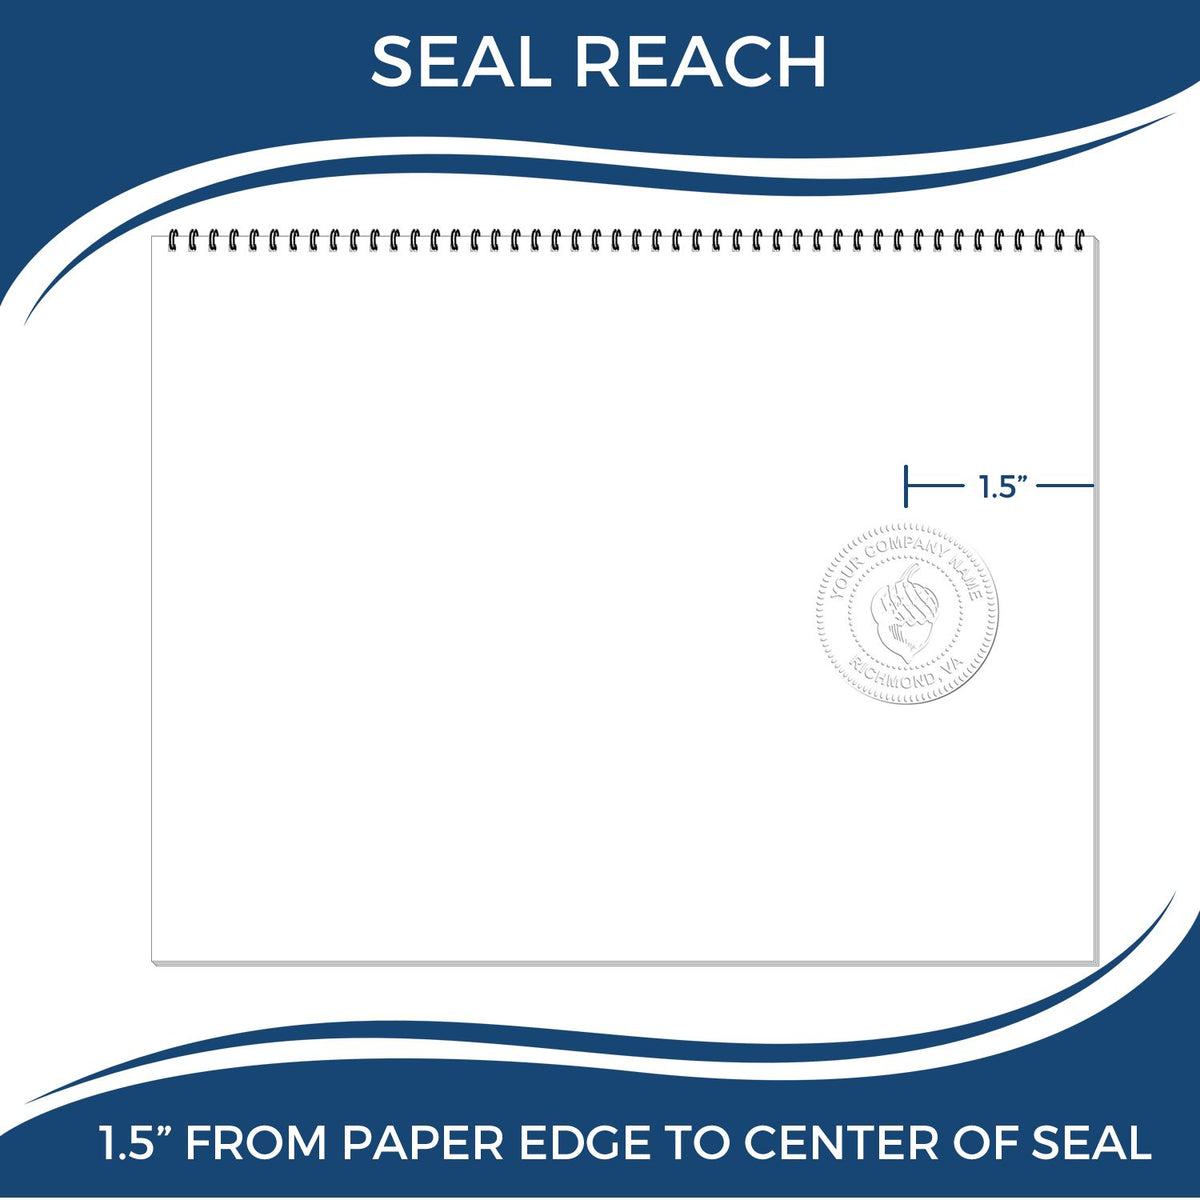 An infographic showing the seal reach which is represented by a ruler and a miniature seal image of the Arkansas Engineer Desk Seal